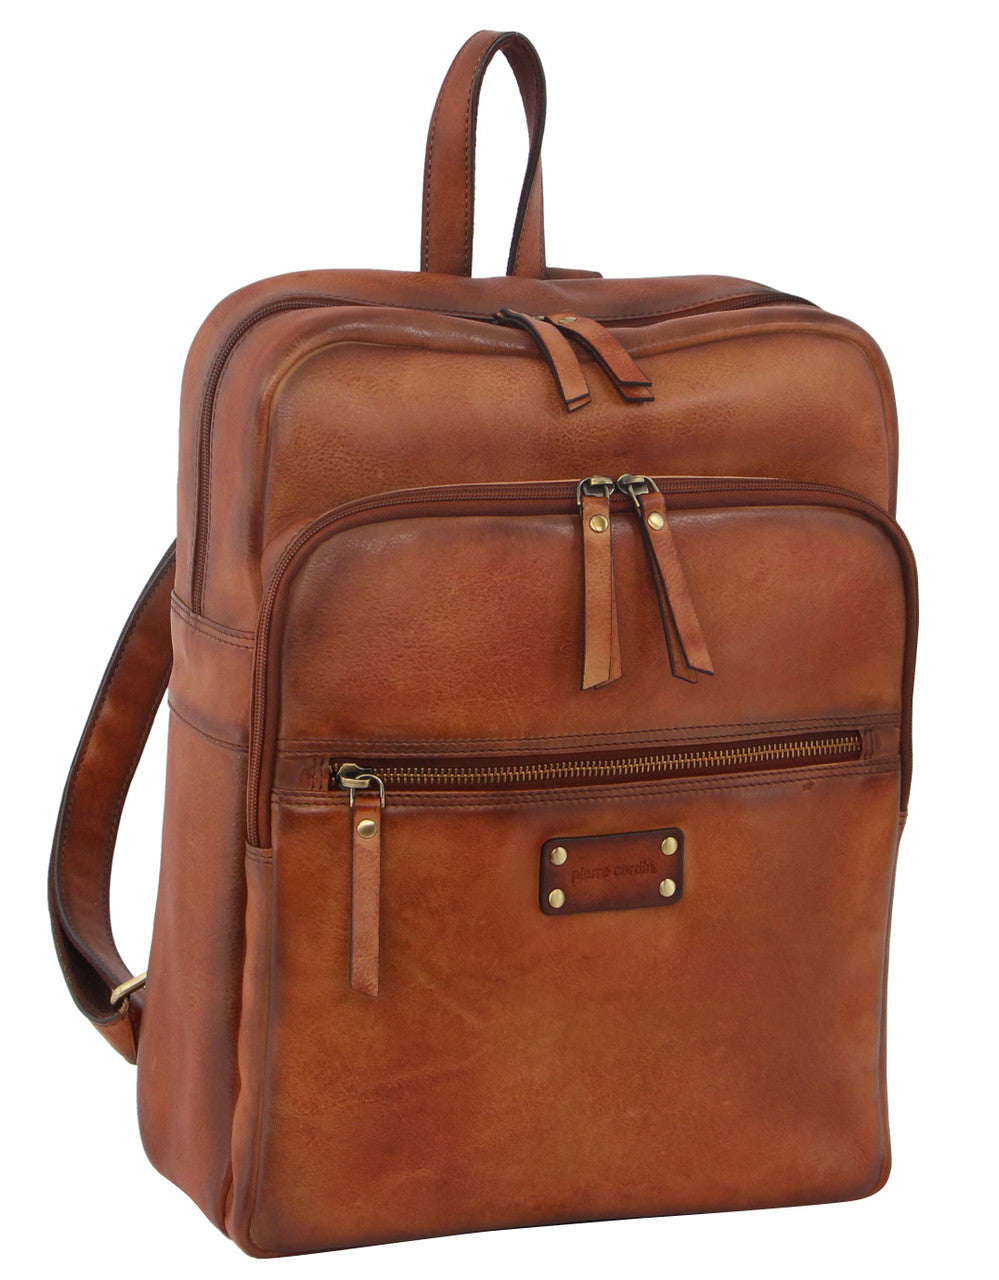 Pierre Cardin Burnished Leather Multi-Compartment Laptop Backpack PC3332 Cog-1